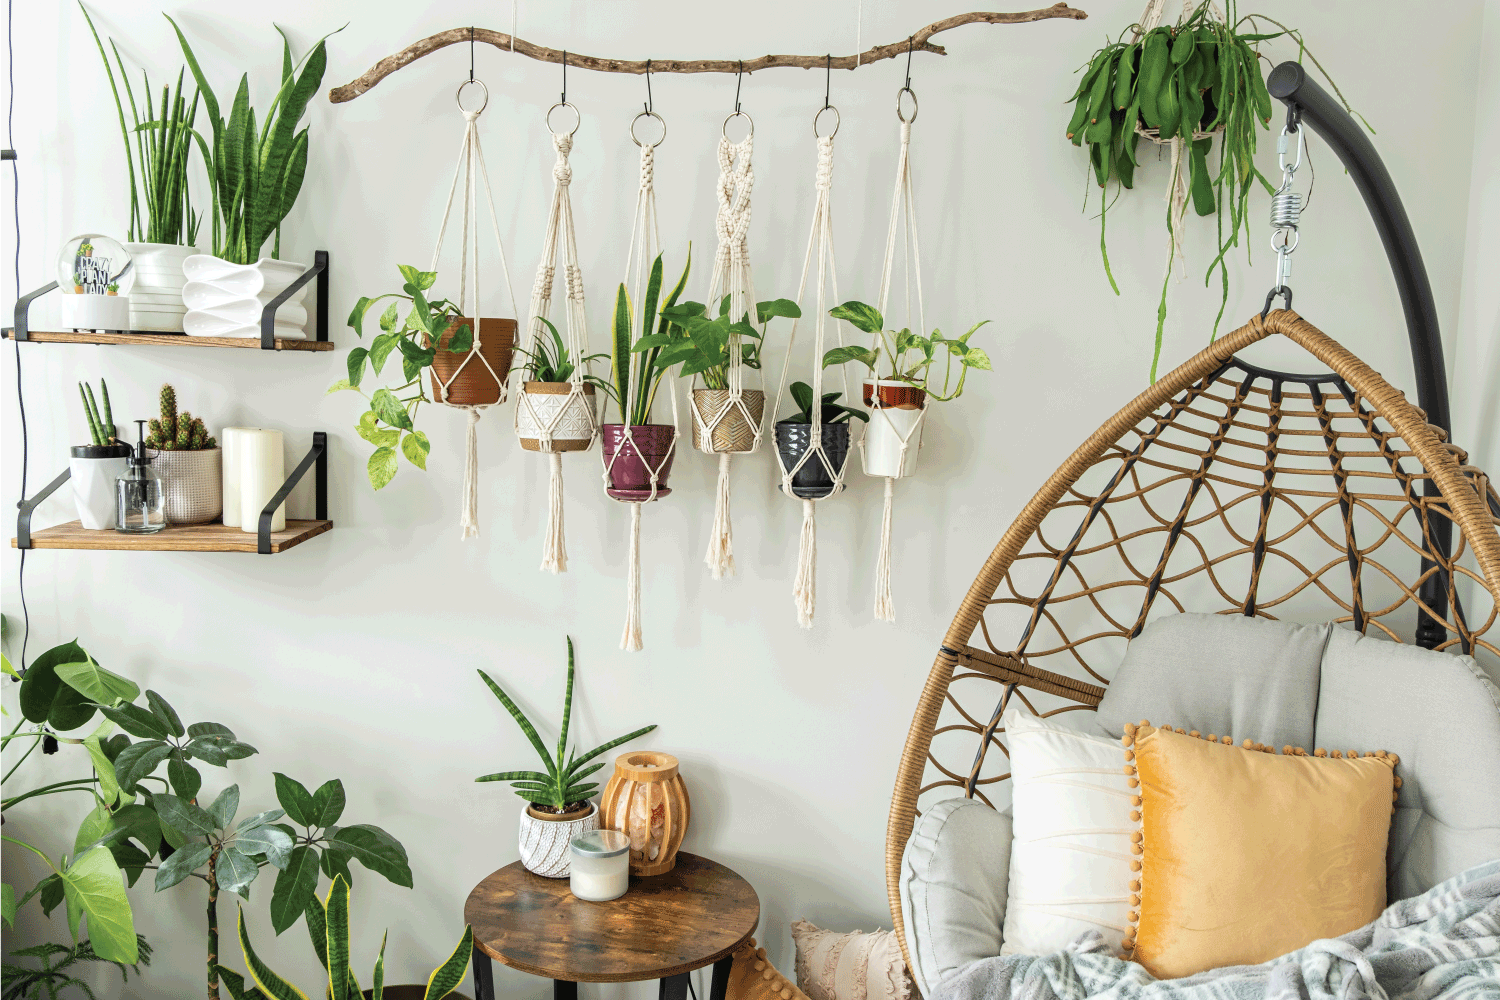 handmade cotton macrame plant hangers are hanging from a wood branch